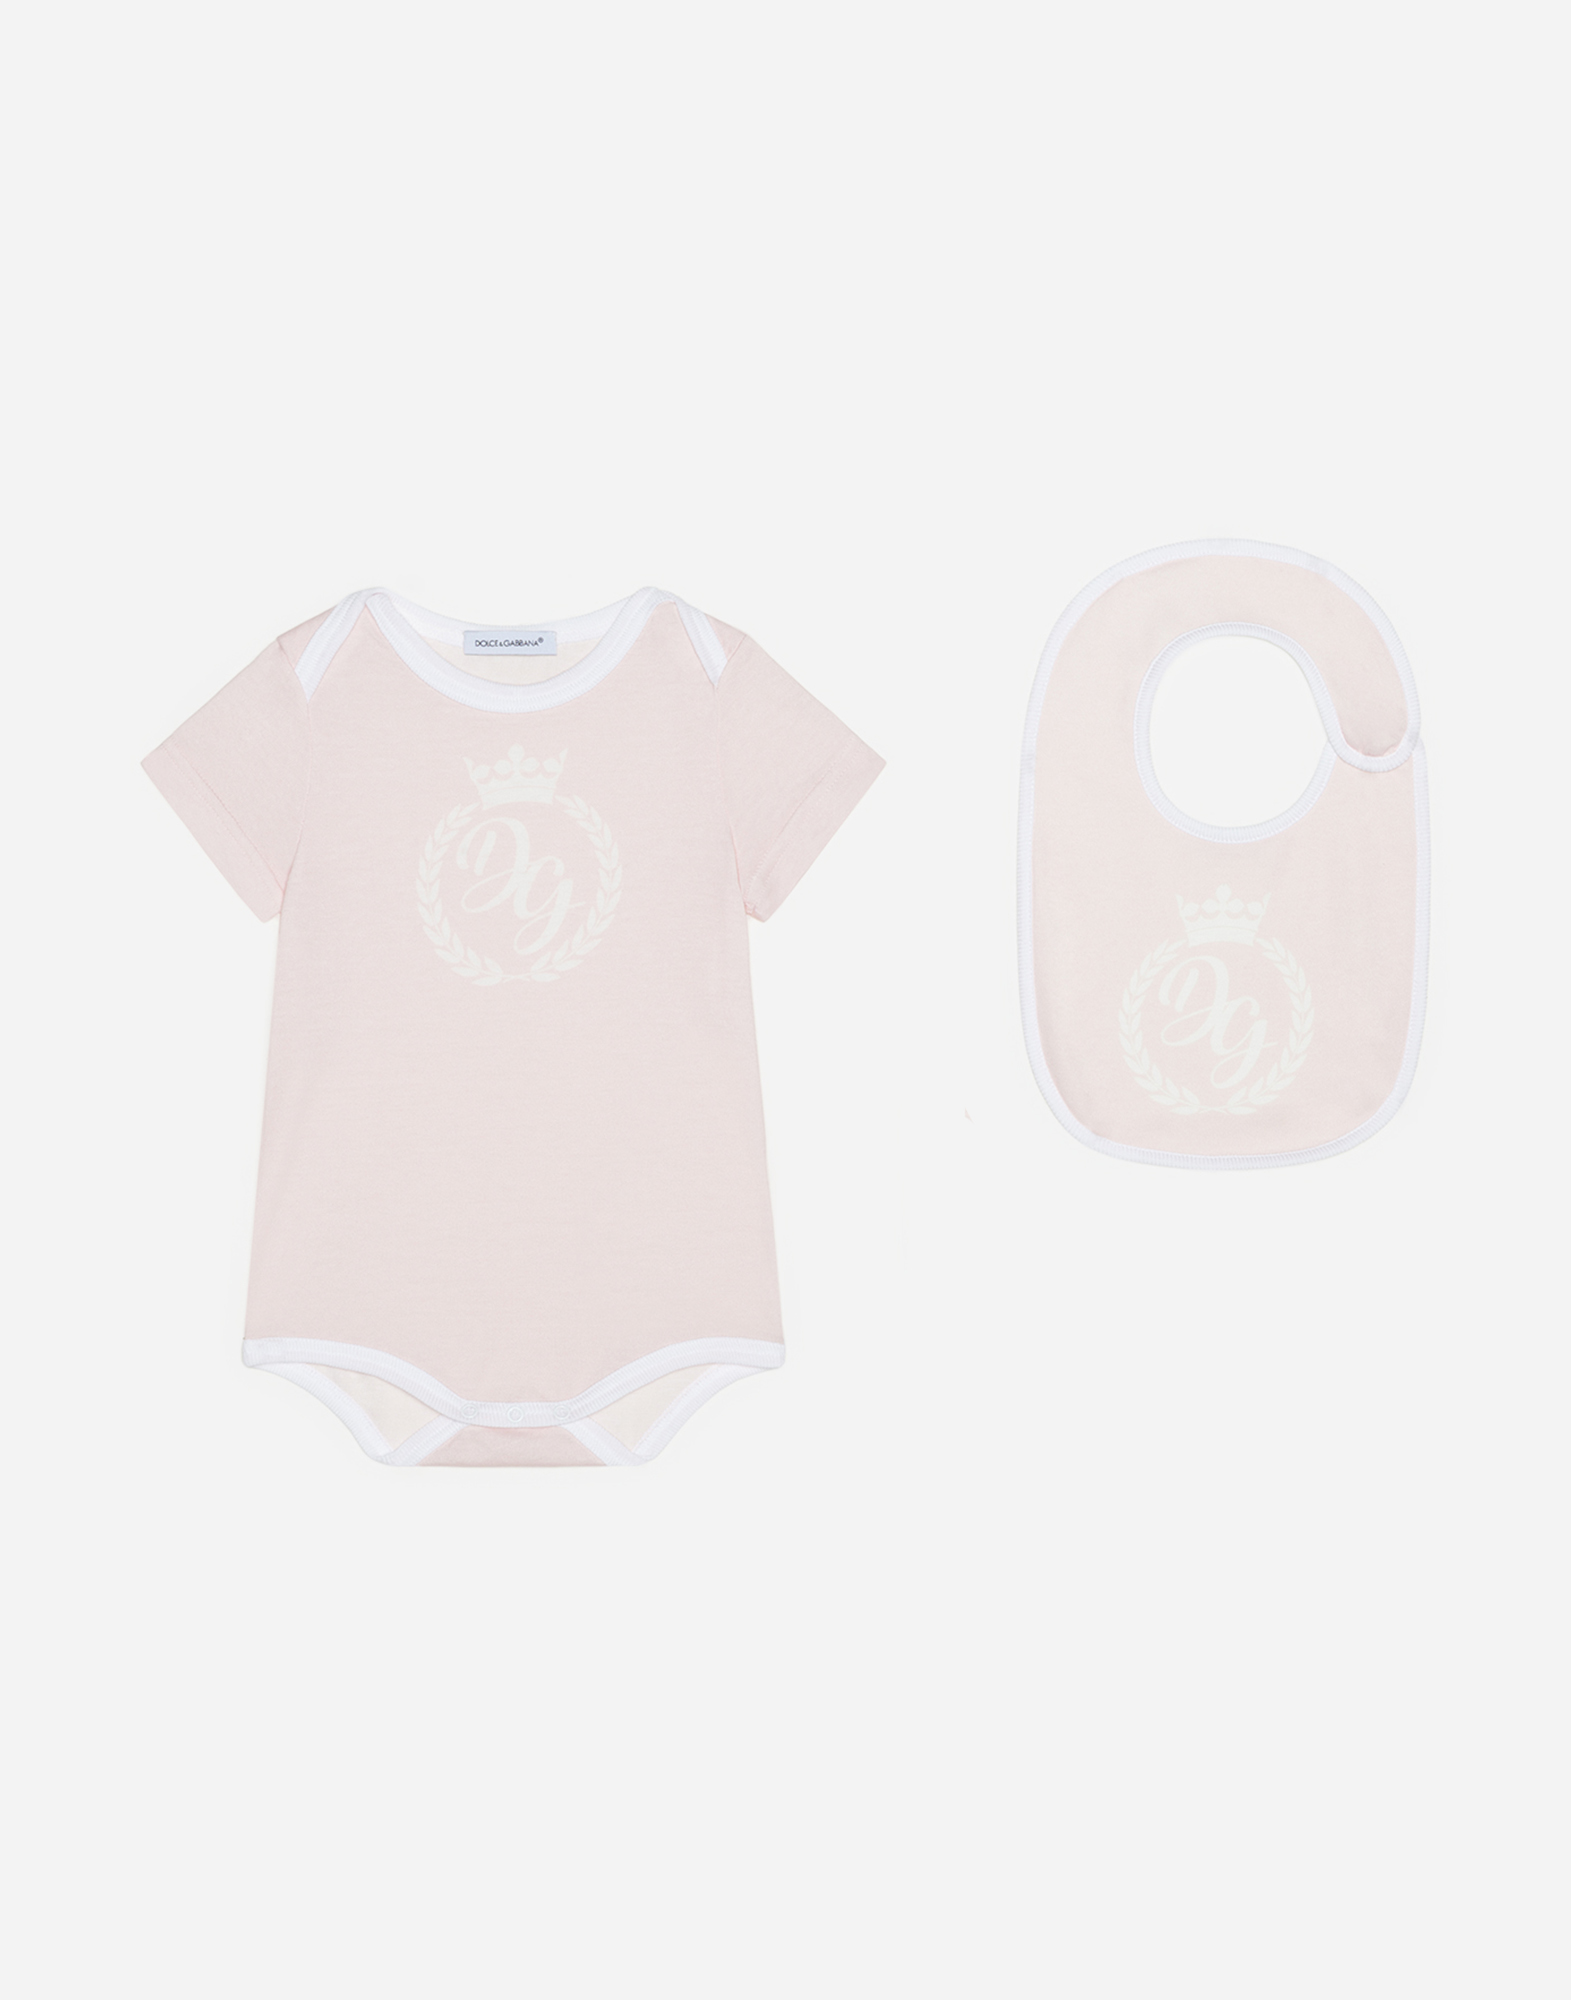 Dolce & Gabbana Babies' 2 Piece Gift Set In Jersey With Pink Dg Print